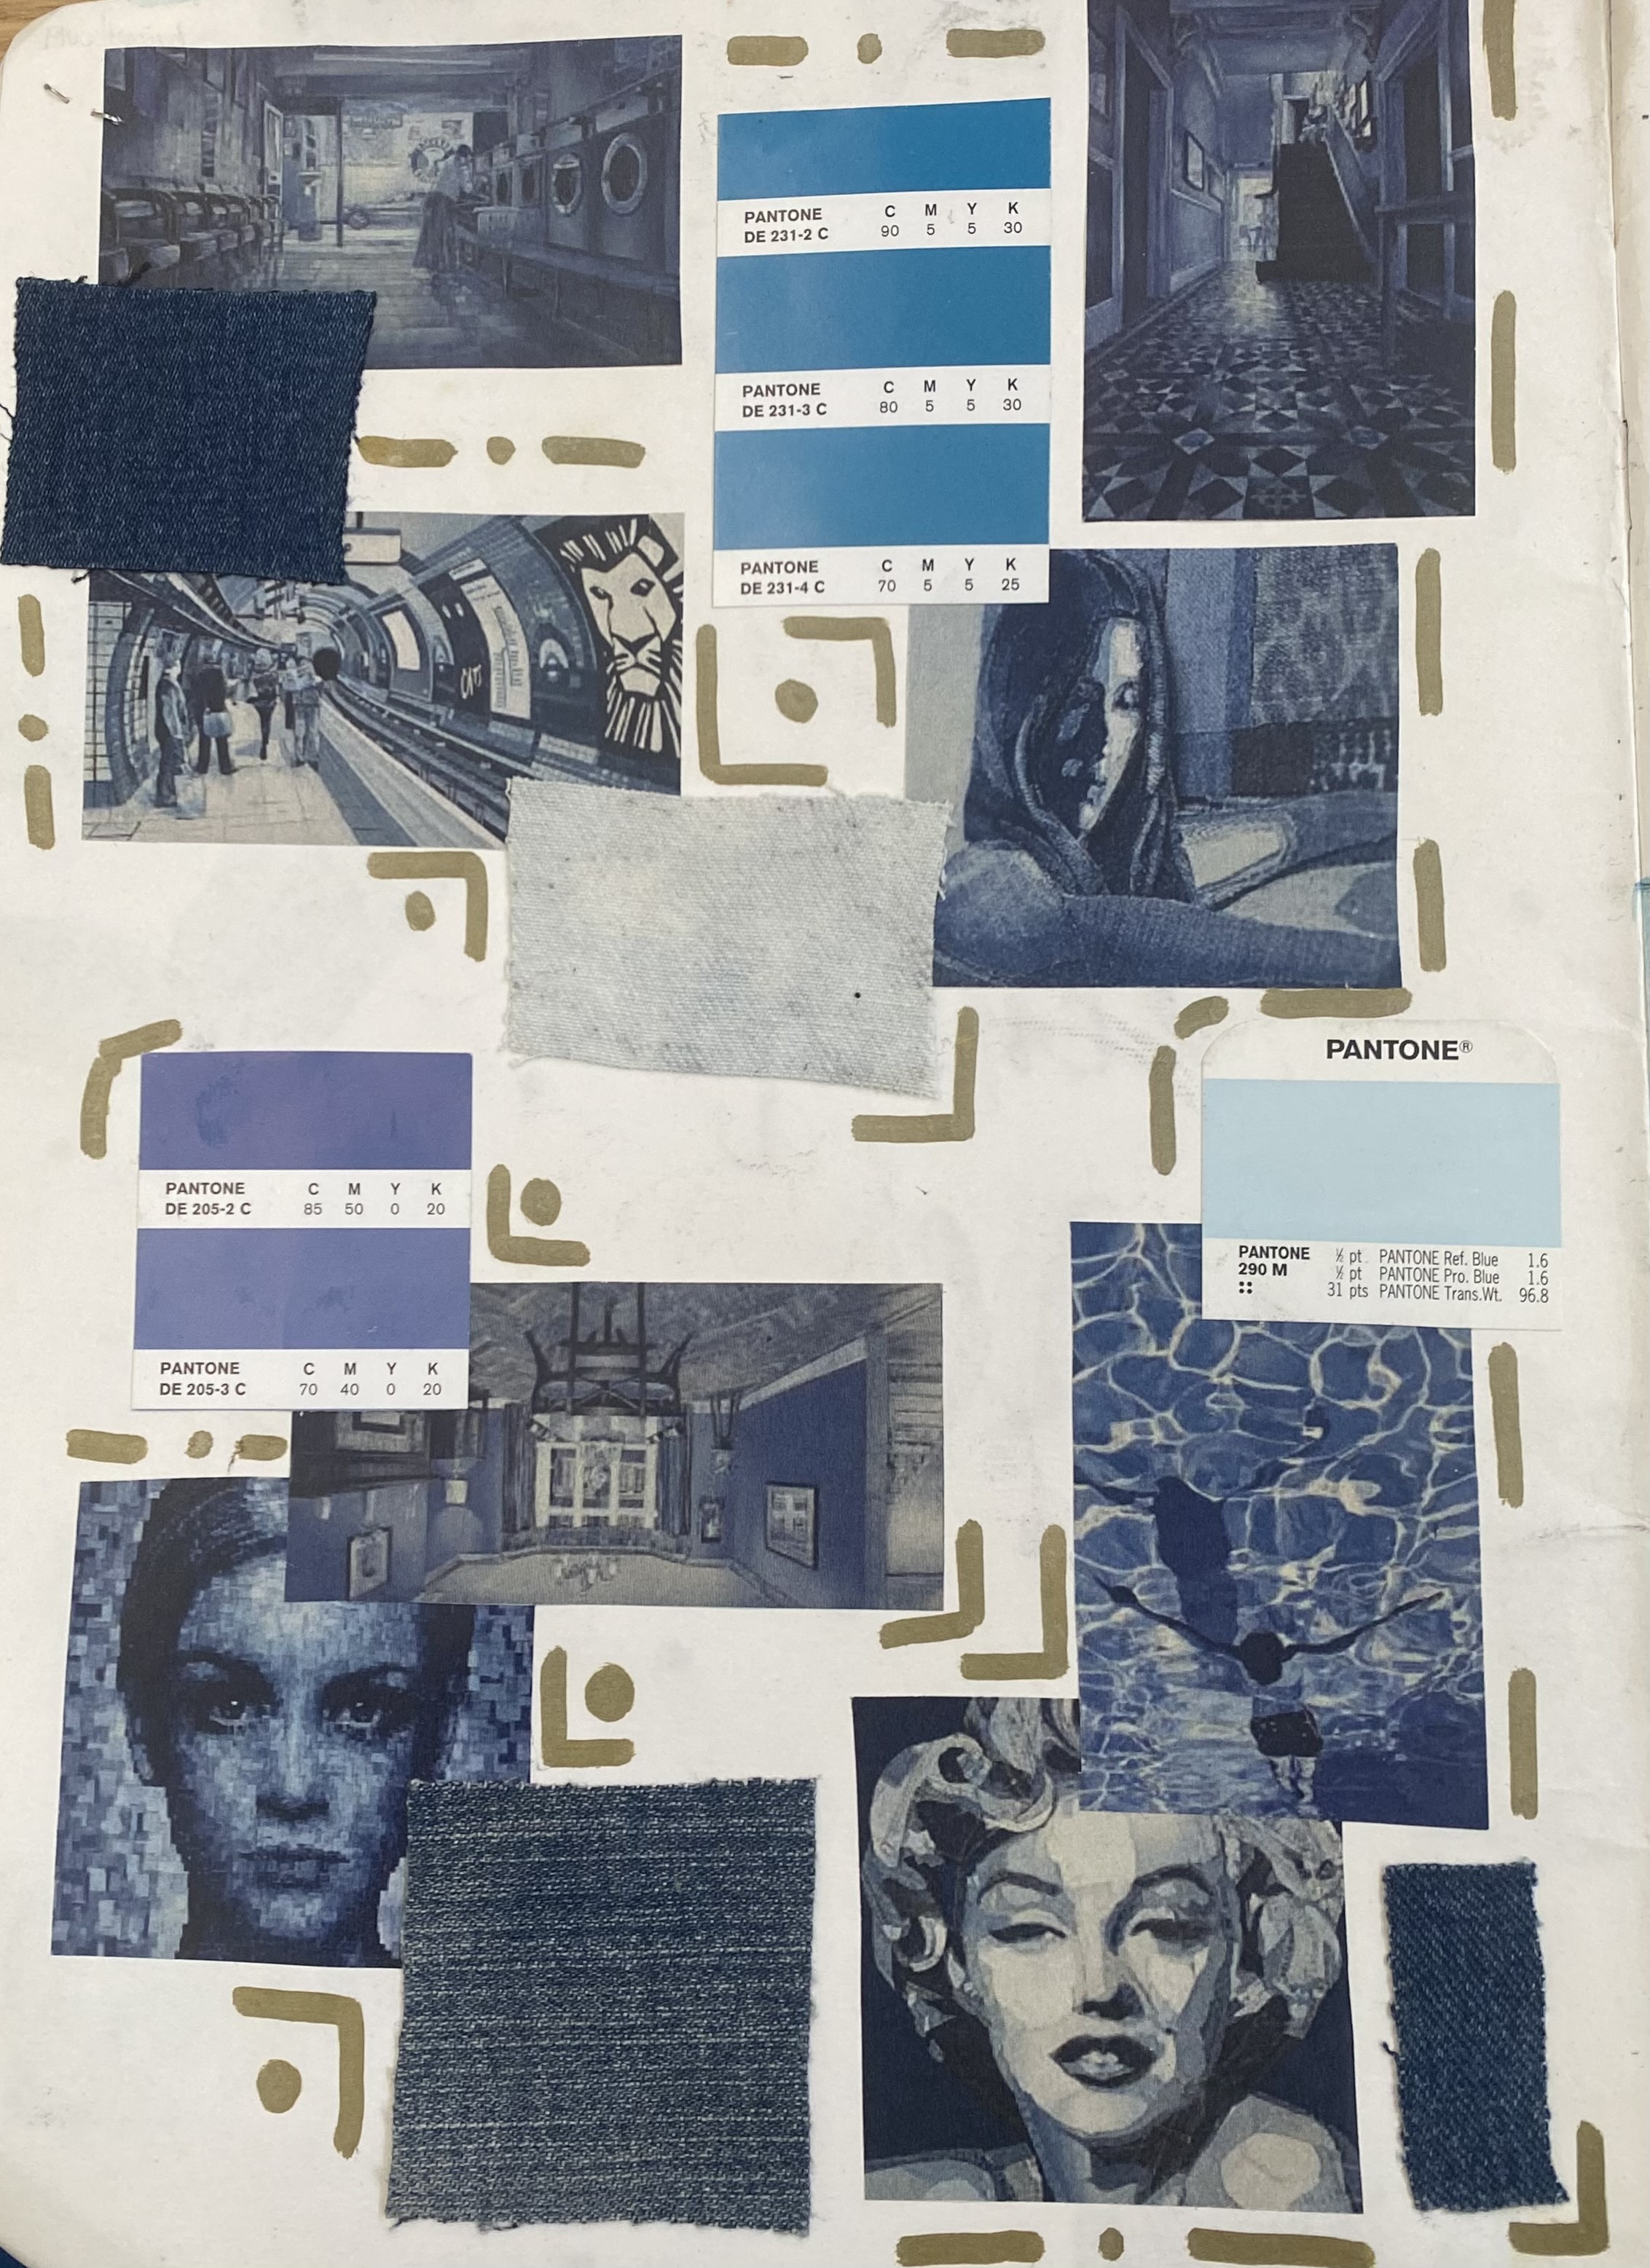 This is a mood board I had used to come up with different denim design ideas.